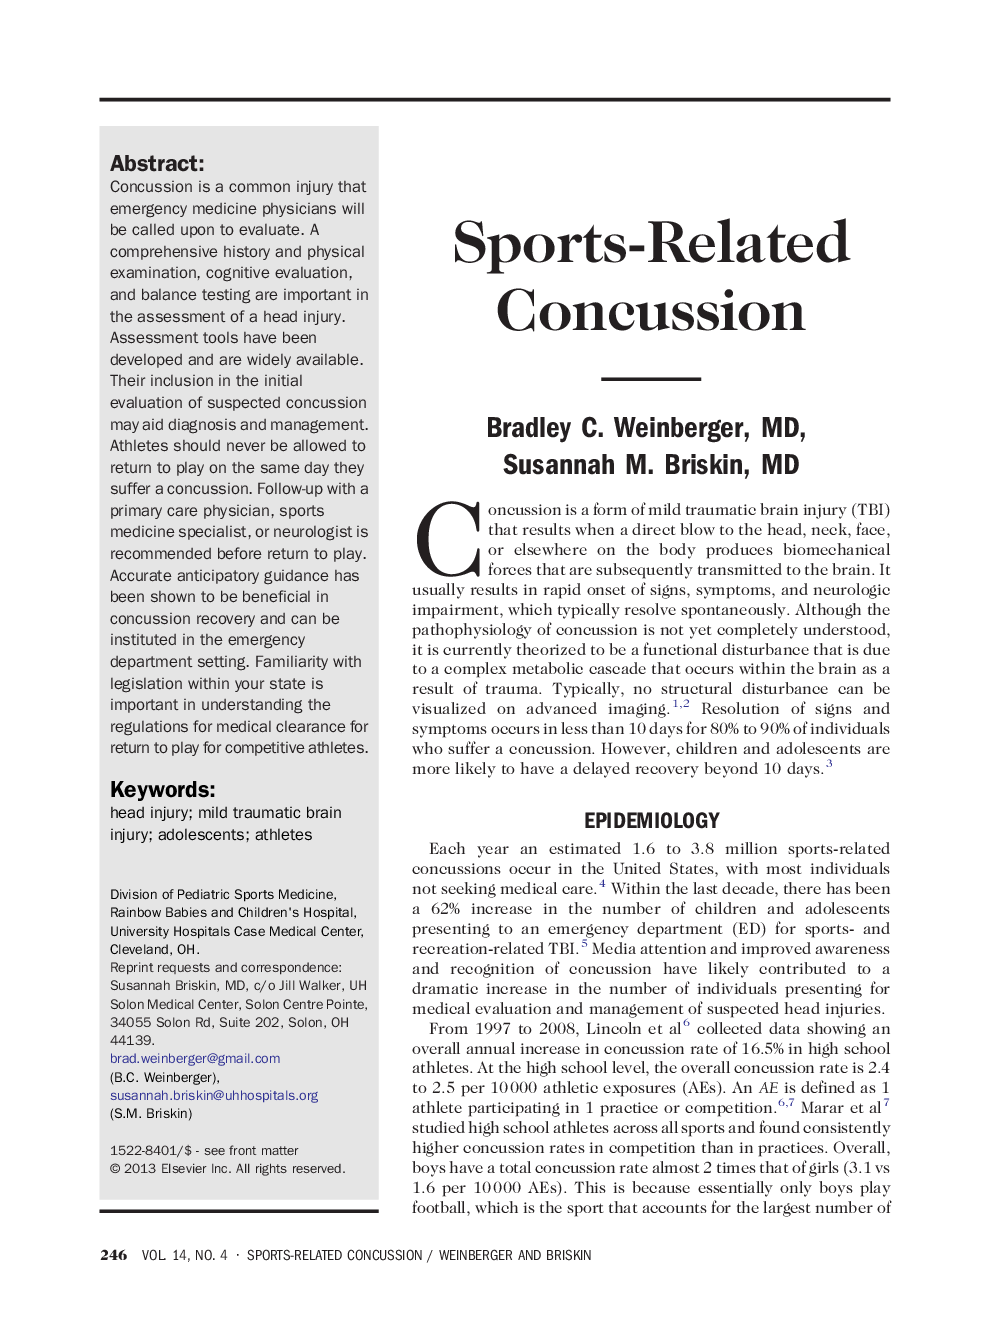 Sports-Related Concussion